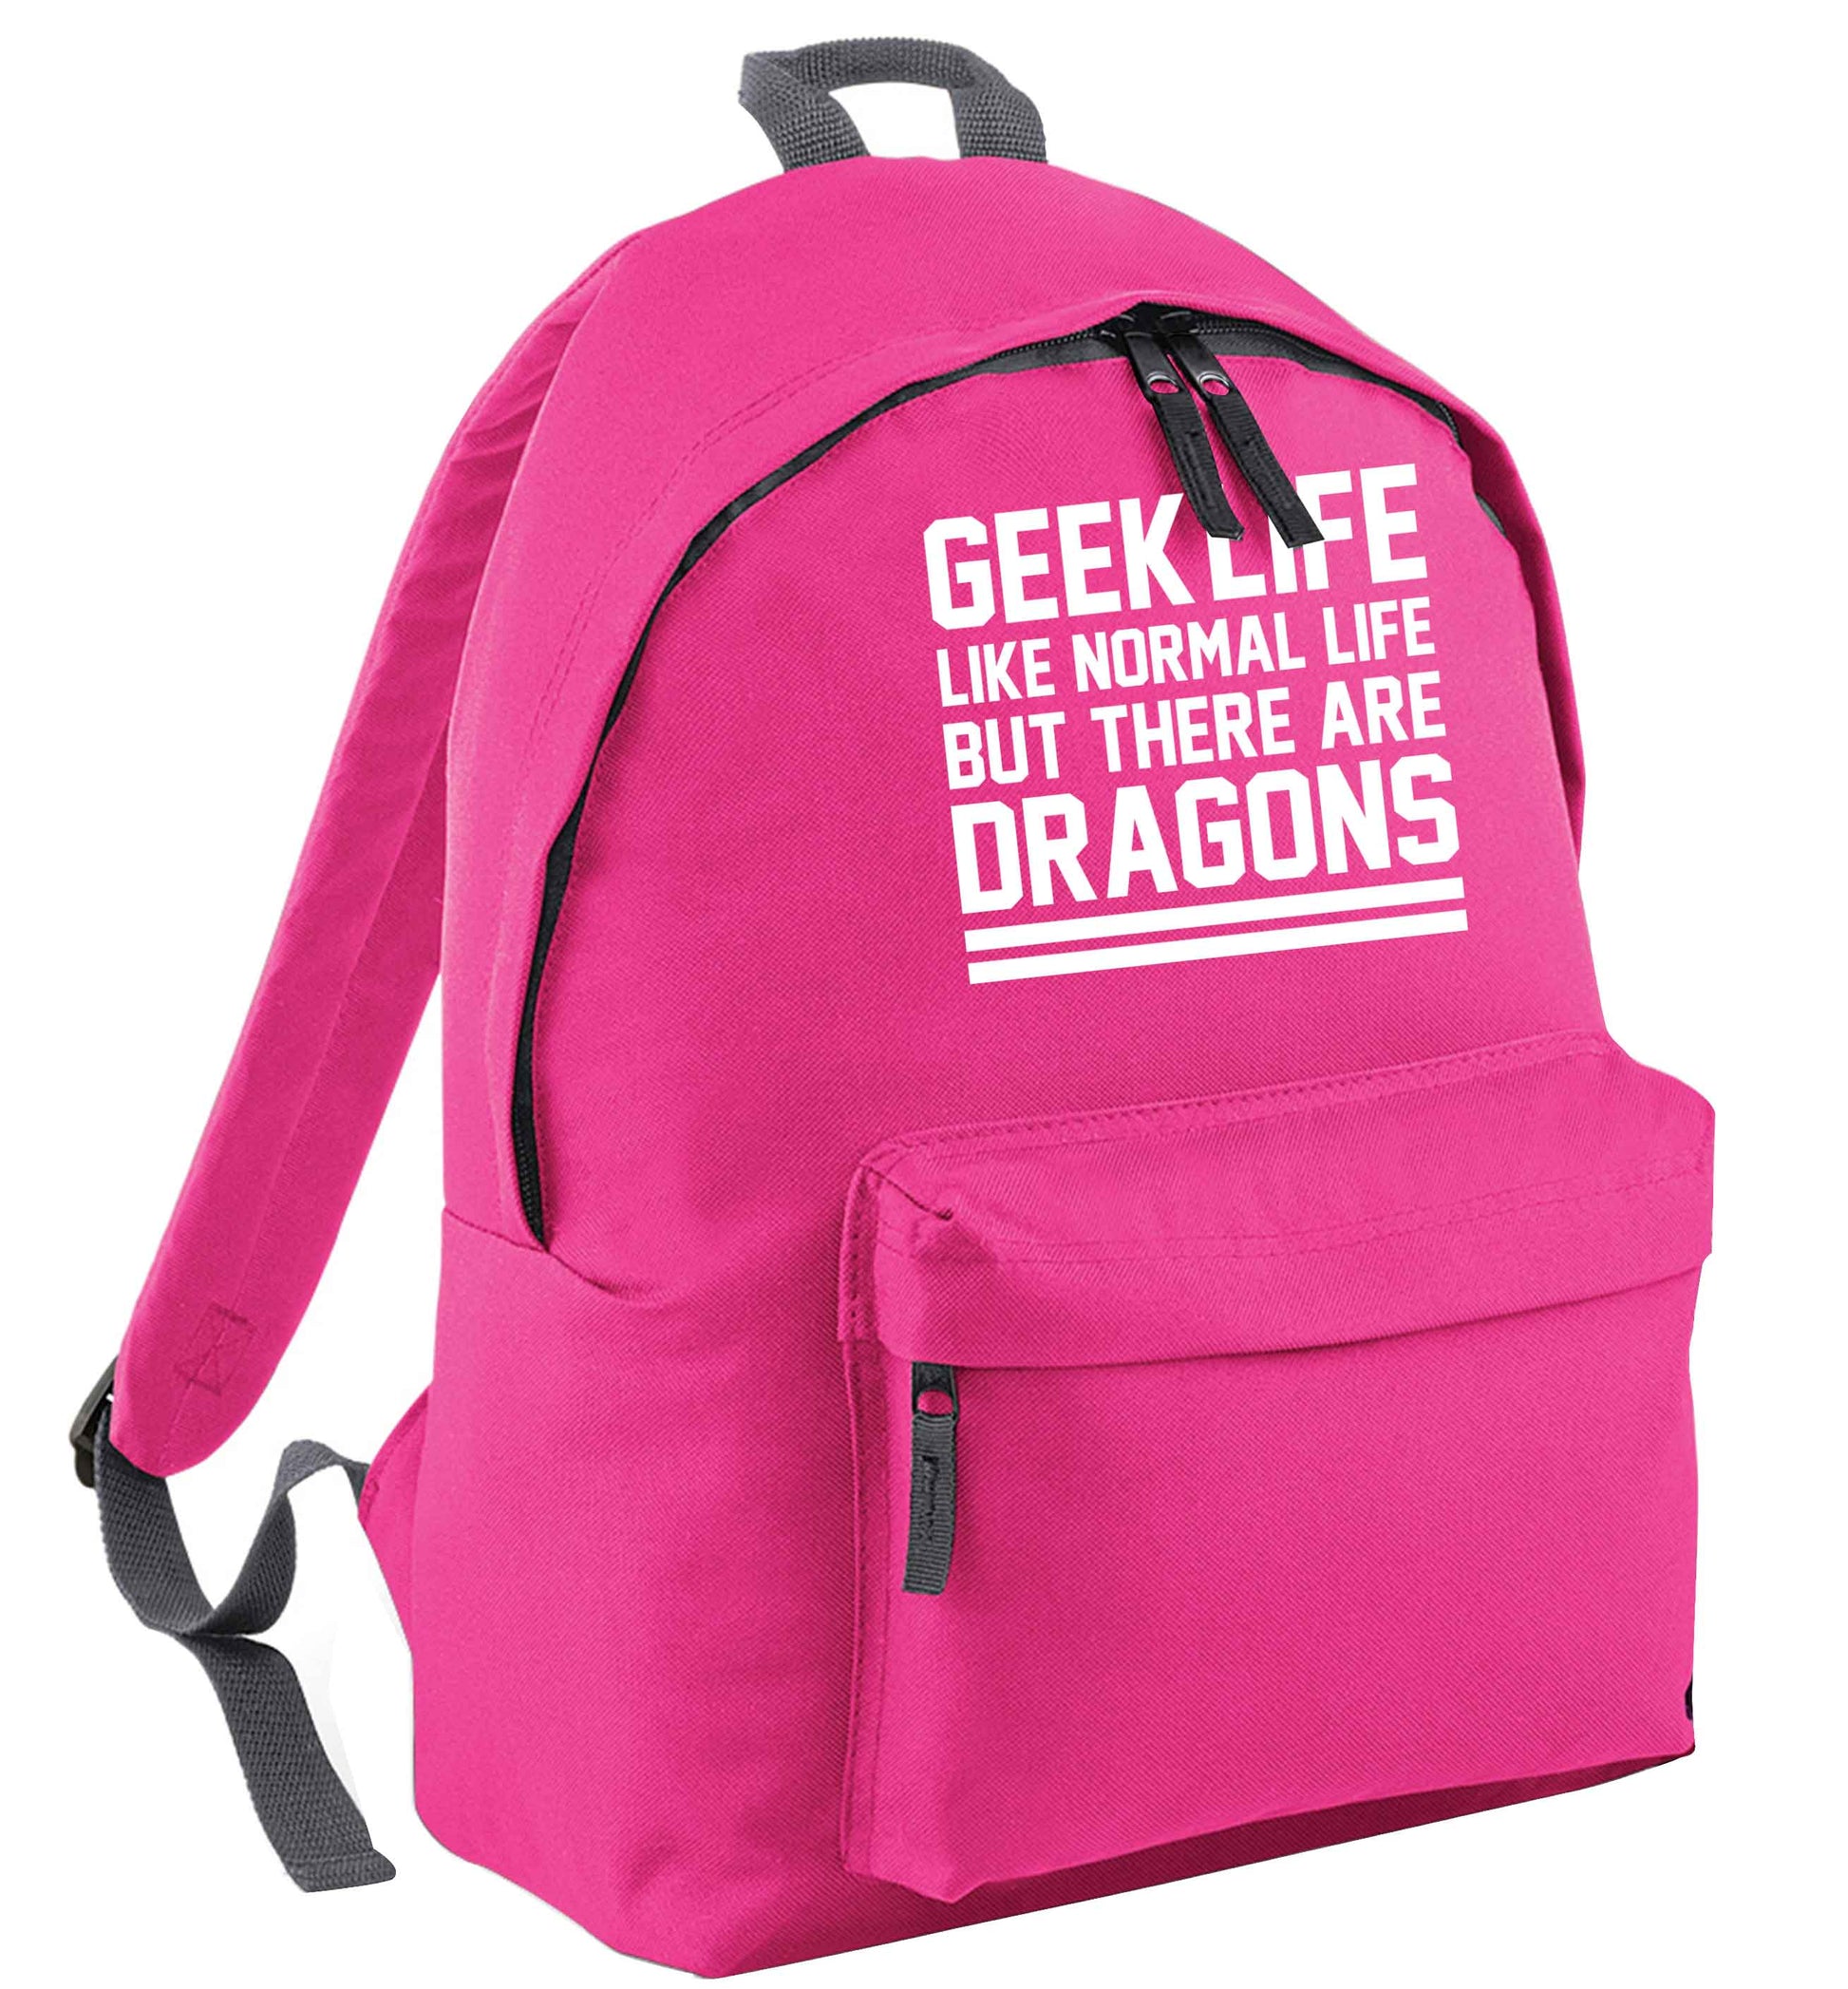 Geek life like normal life but there are dragons pink adults backpack